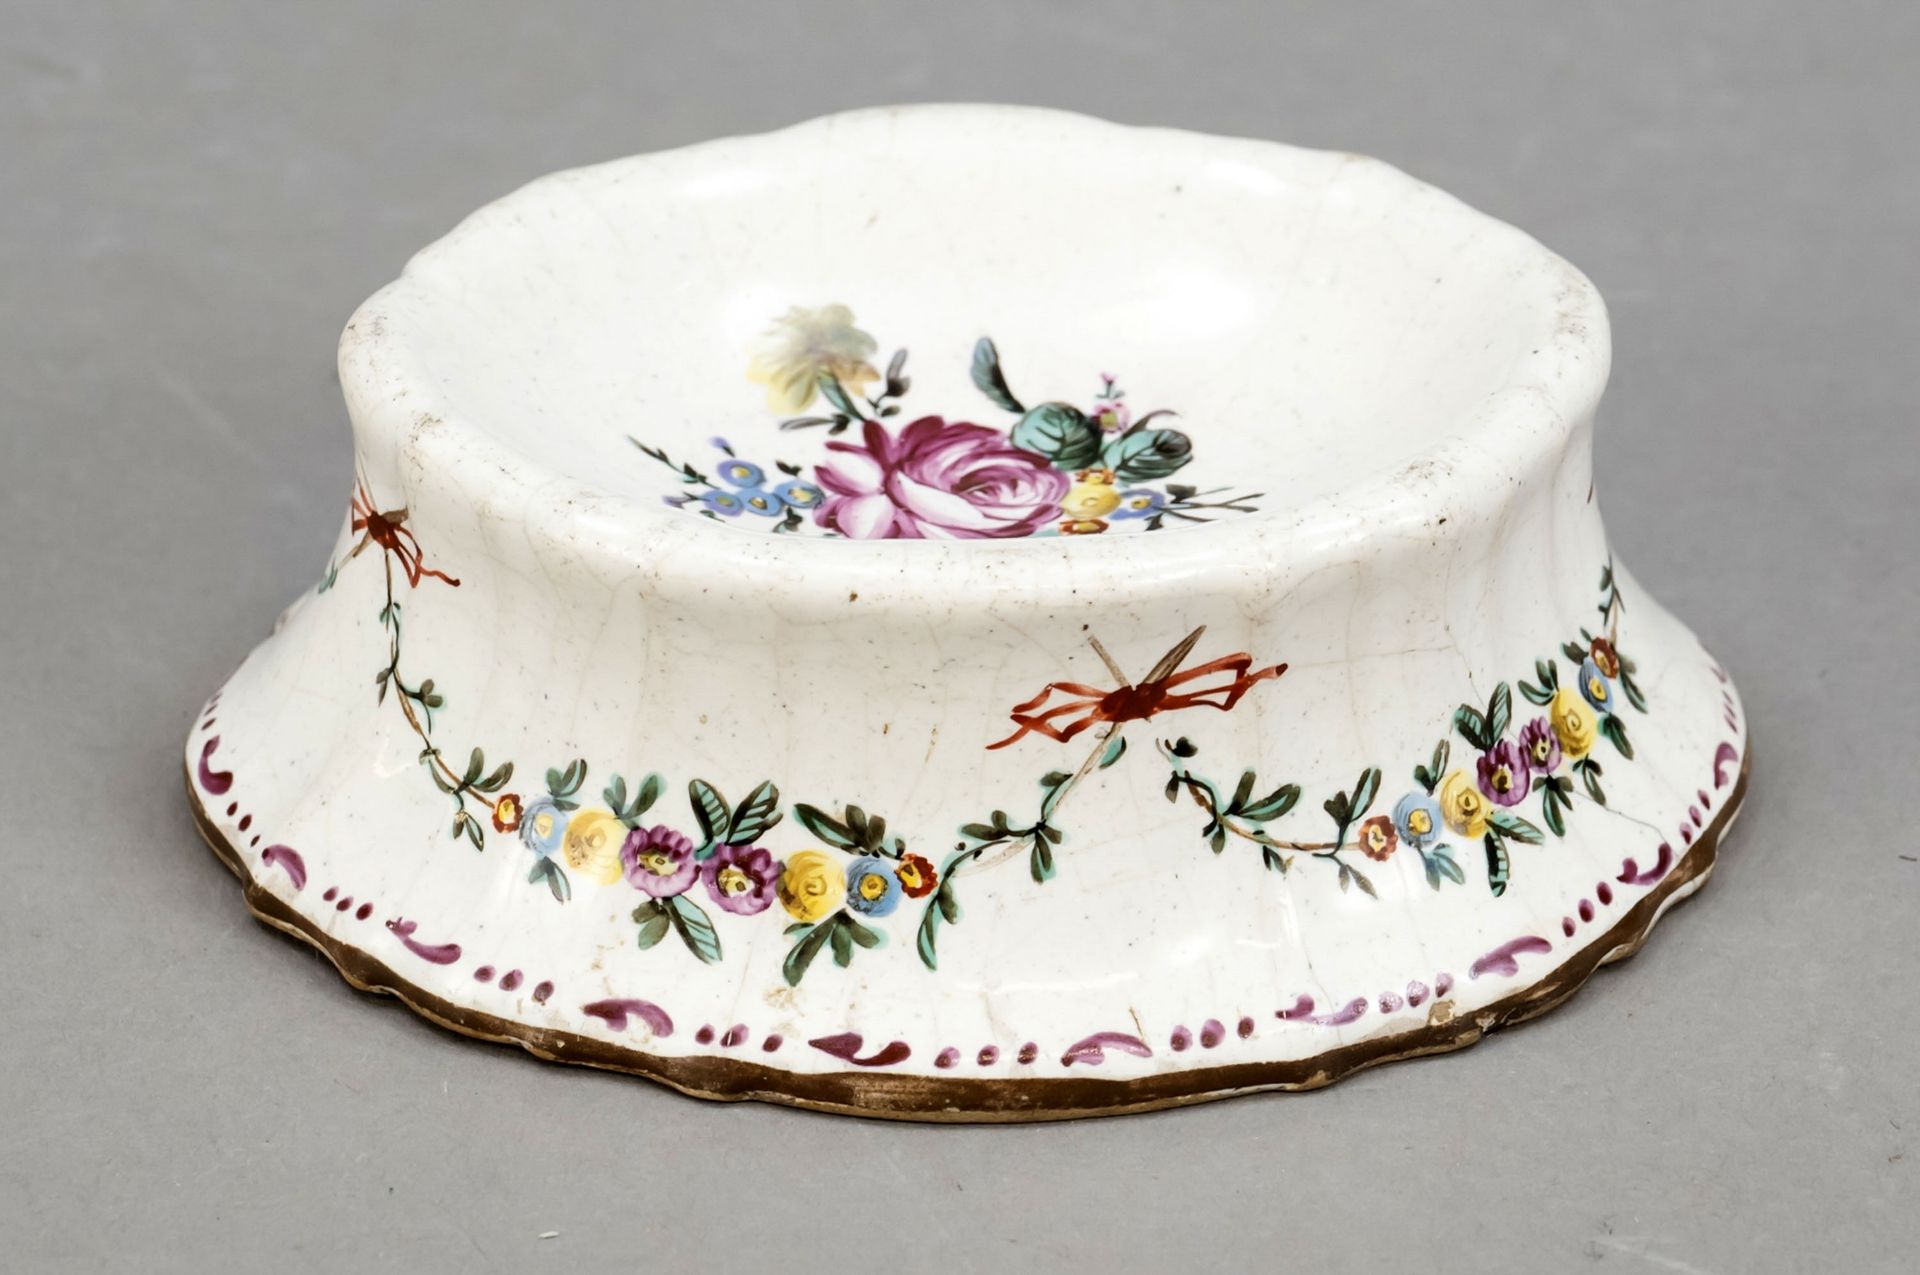 Saliere, 18th/19th century, faience, grey body with polychrome floral decoration, bumped rim, l.